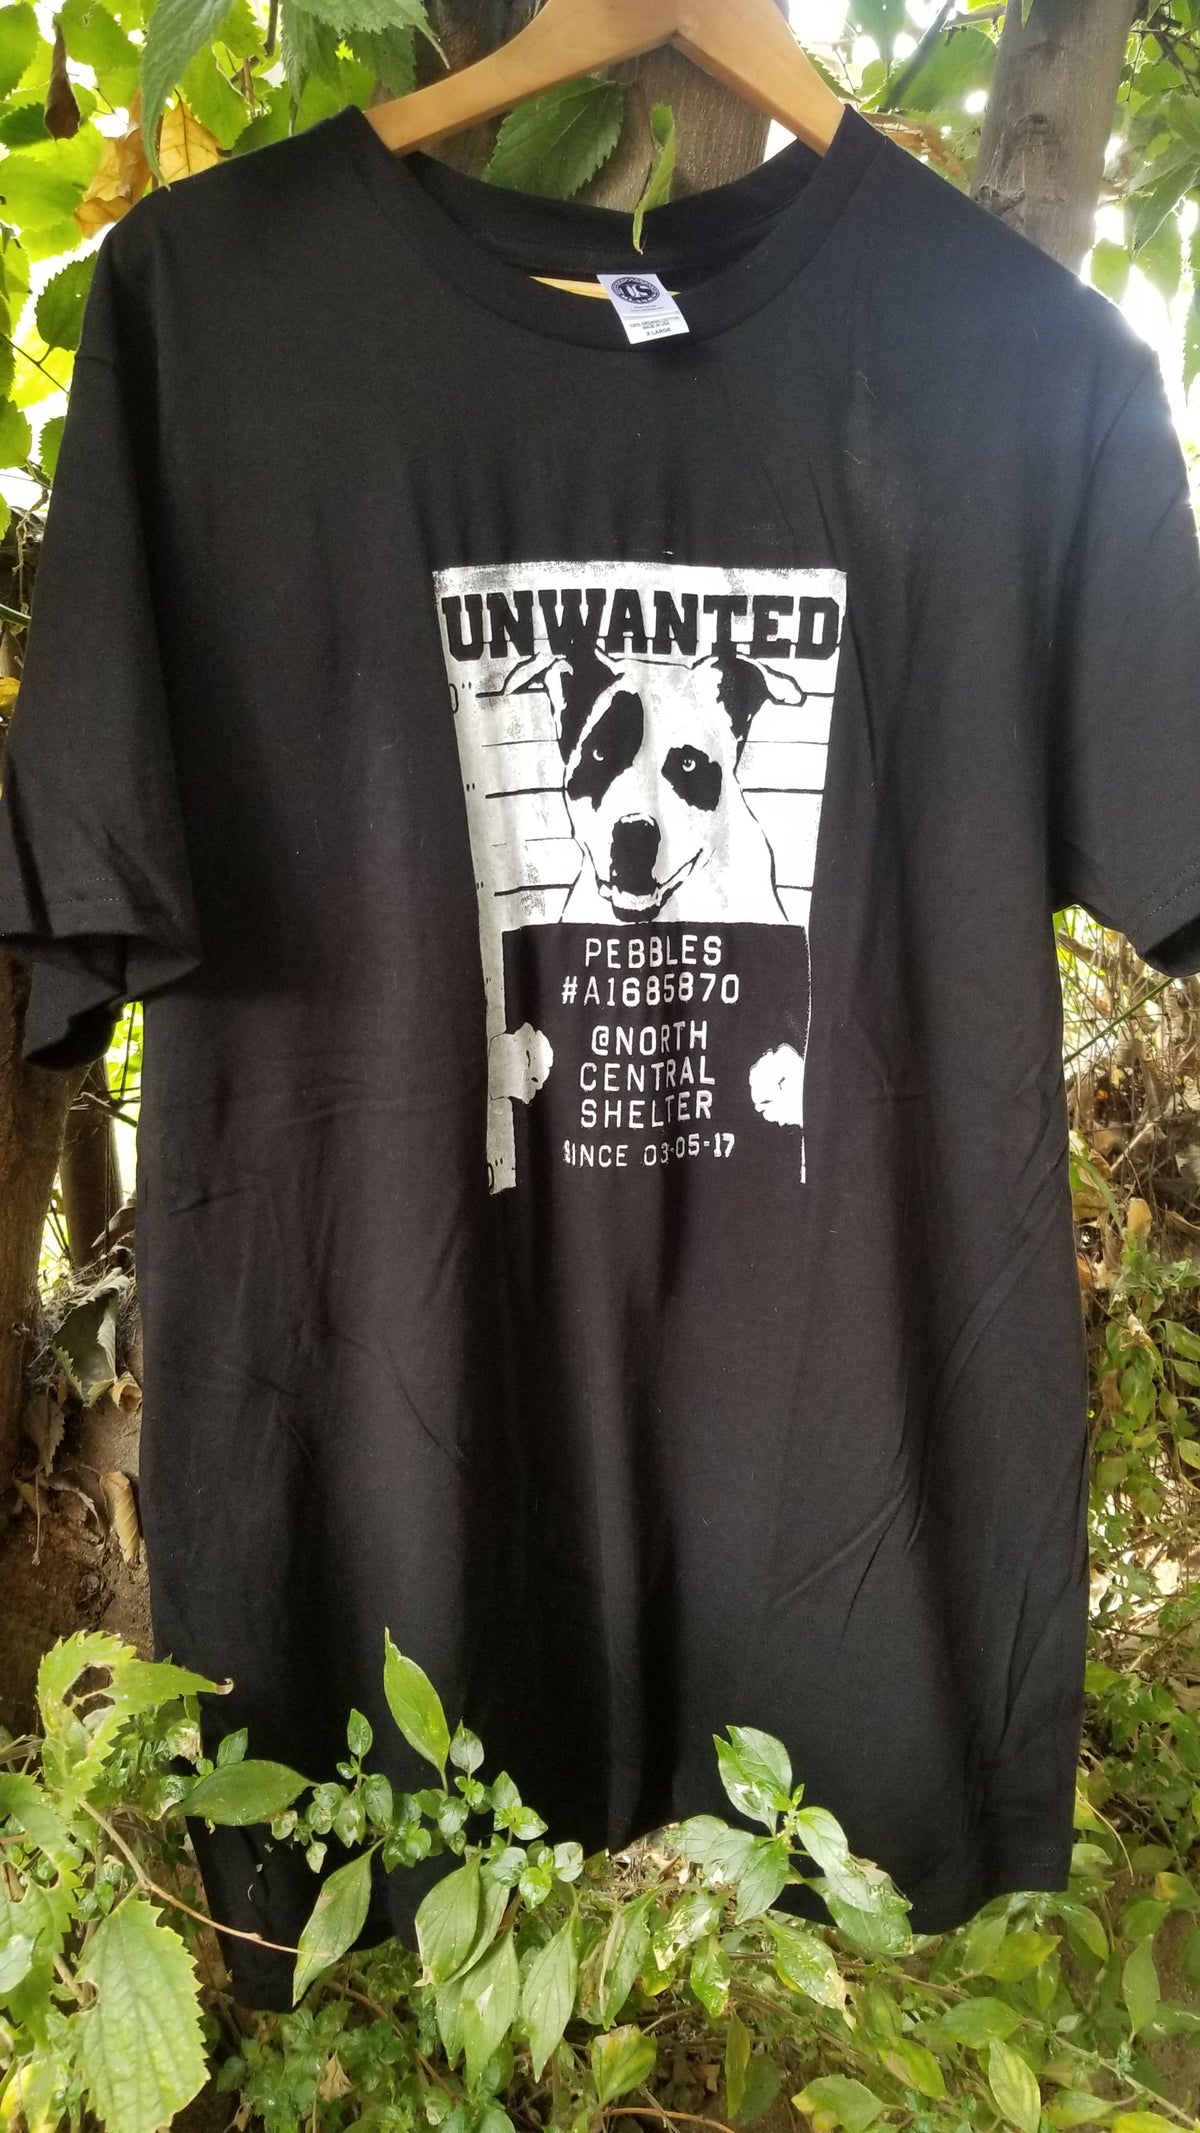 Your Unwanted Dog T-shirt